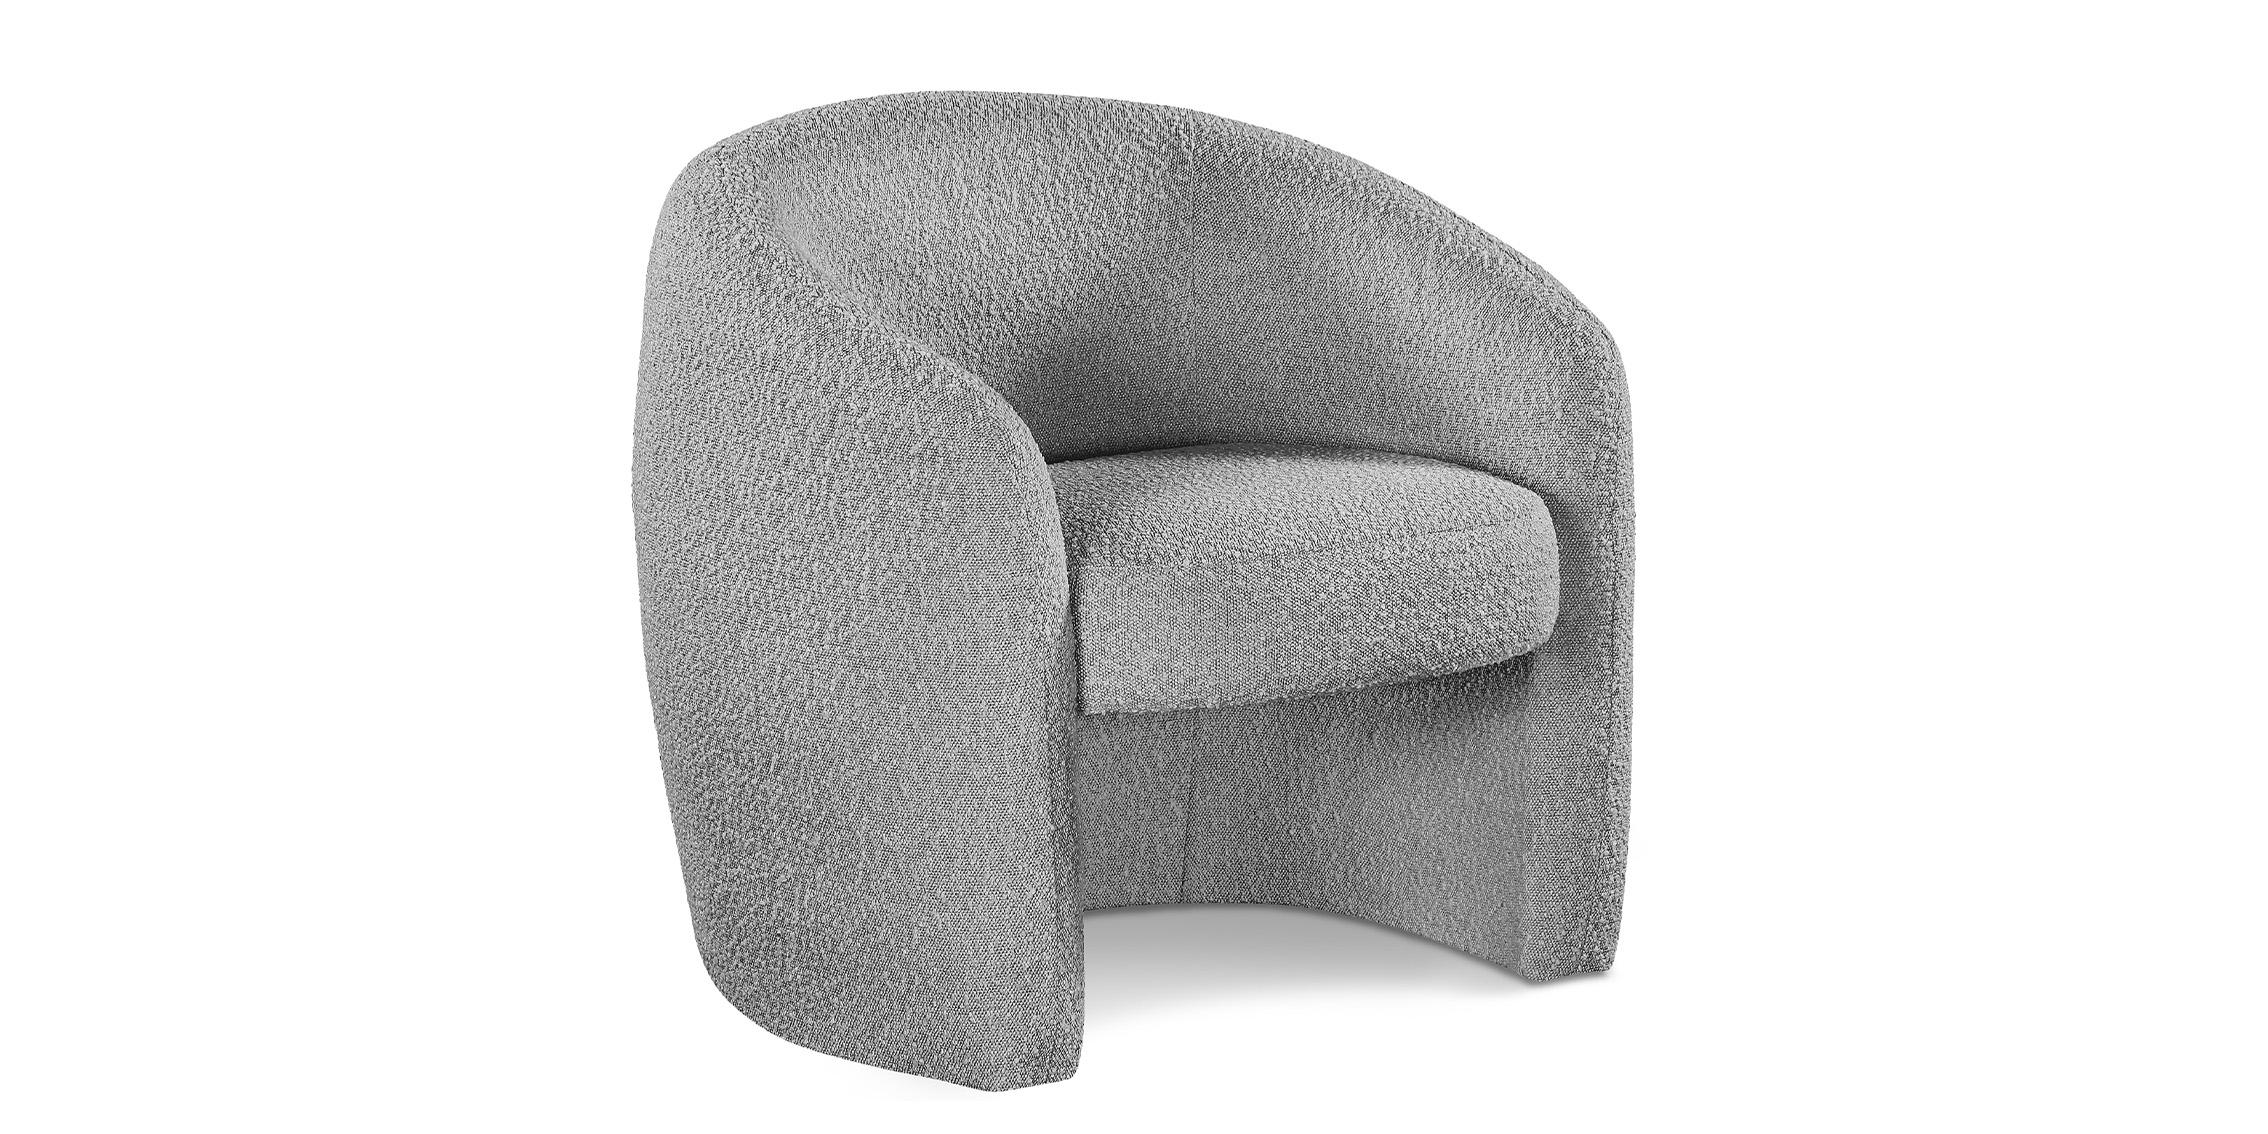 Contemporary, Modern Accent Chair ACADIA 543Grey 543Grey in Gray 